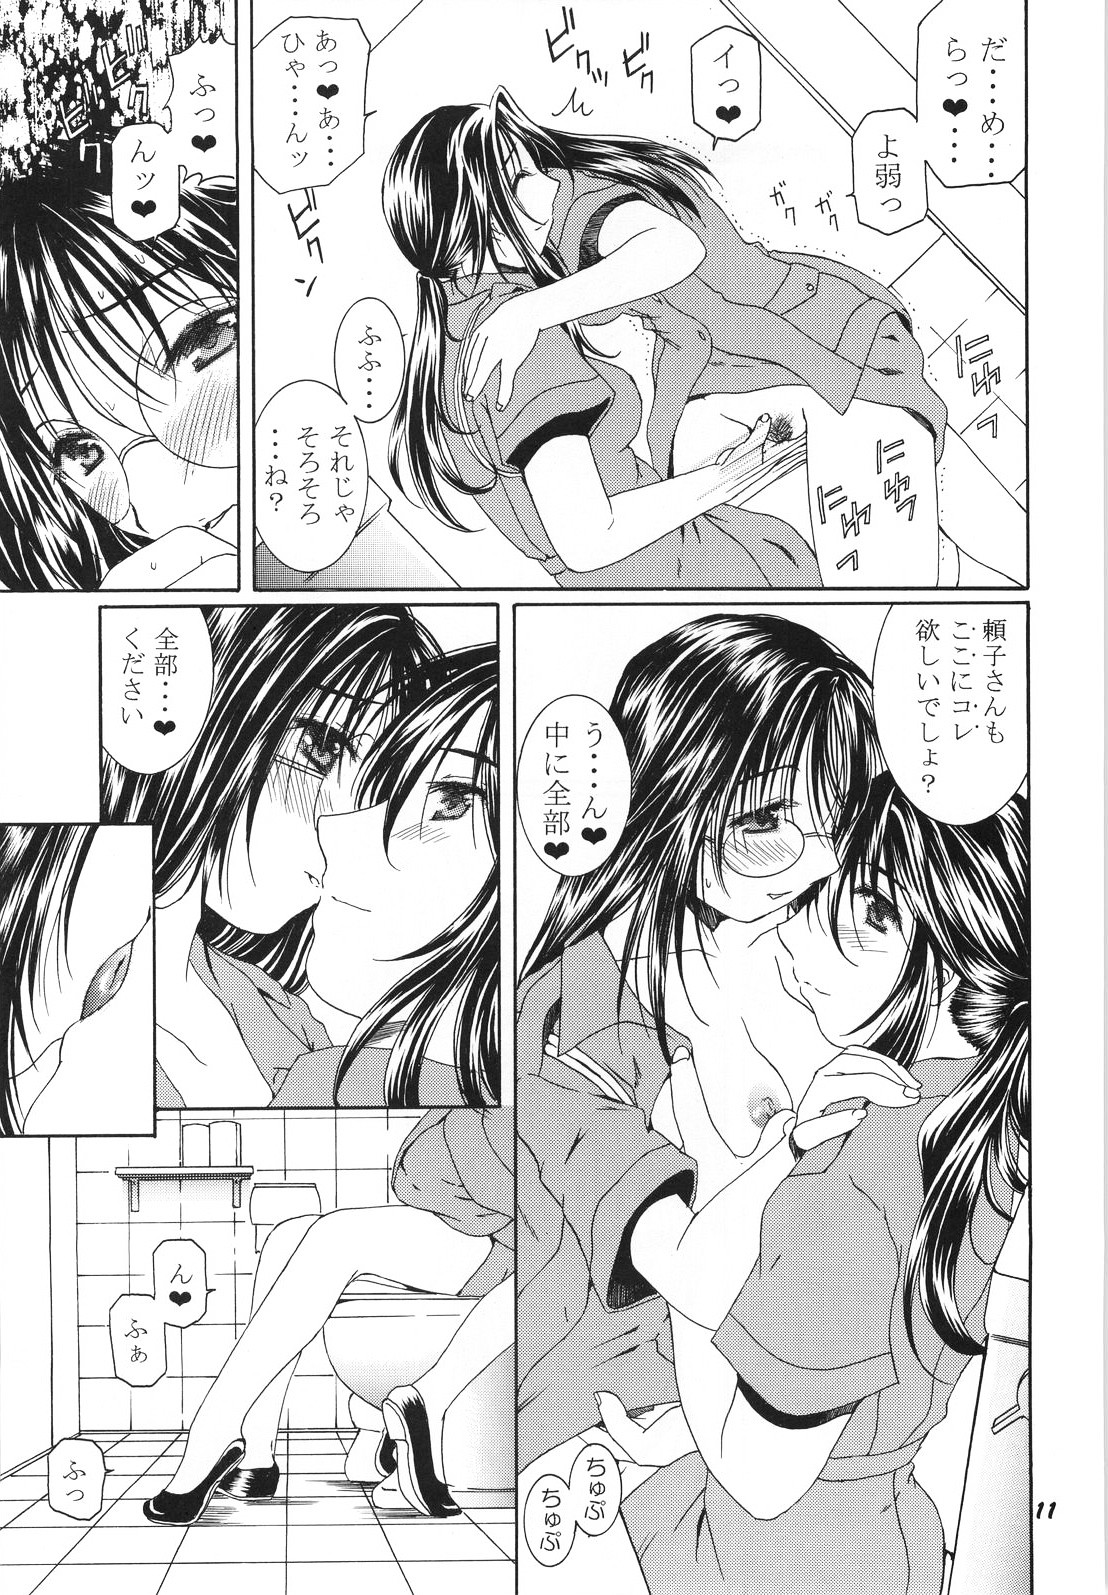 [Mechanical Code (Takahashi Kobato)] method to the madness 3 (You're Under Arrest!) page 10 full